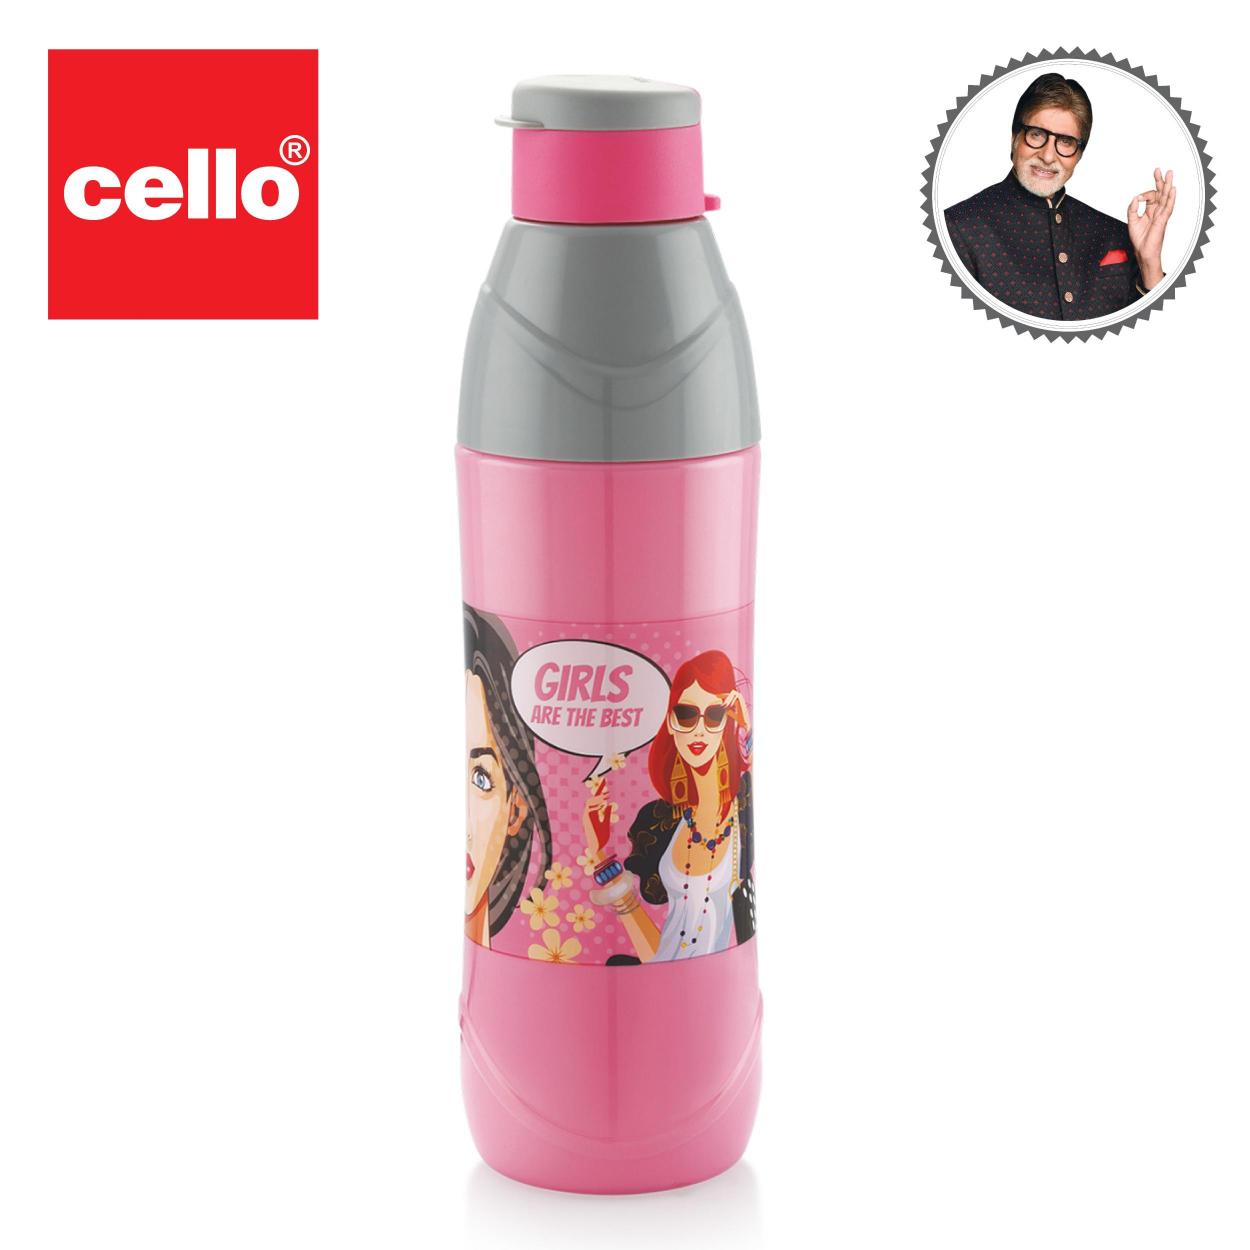 Puro Trends 900 Cold Insulated Kids Water Bottle, 690ml Pink / 690ml